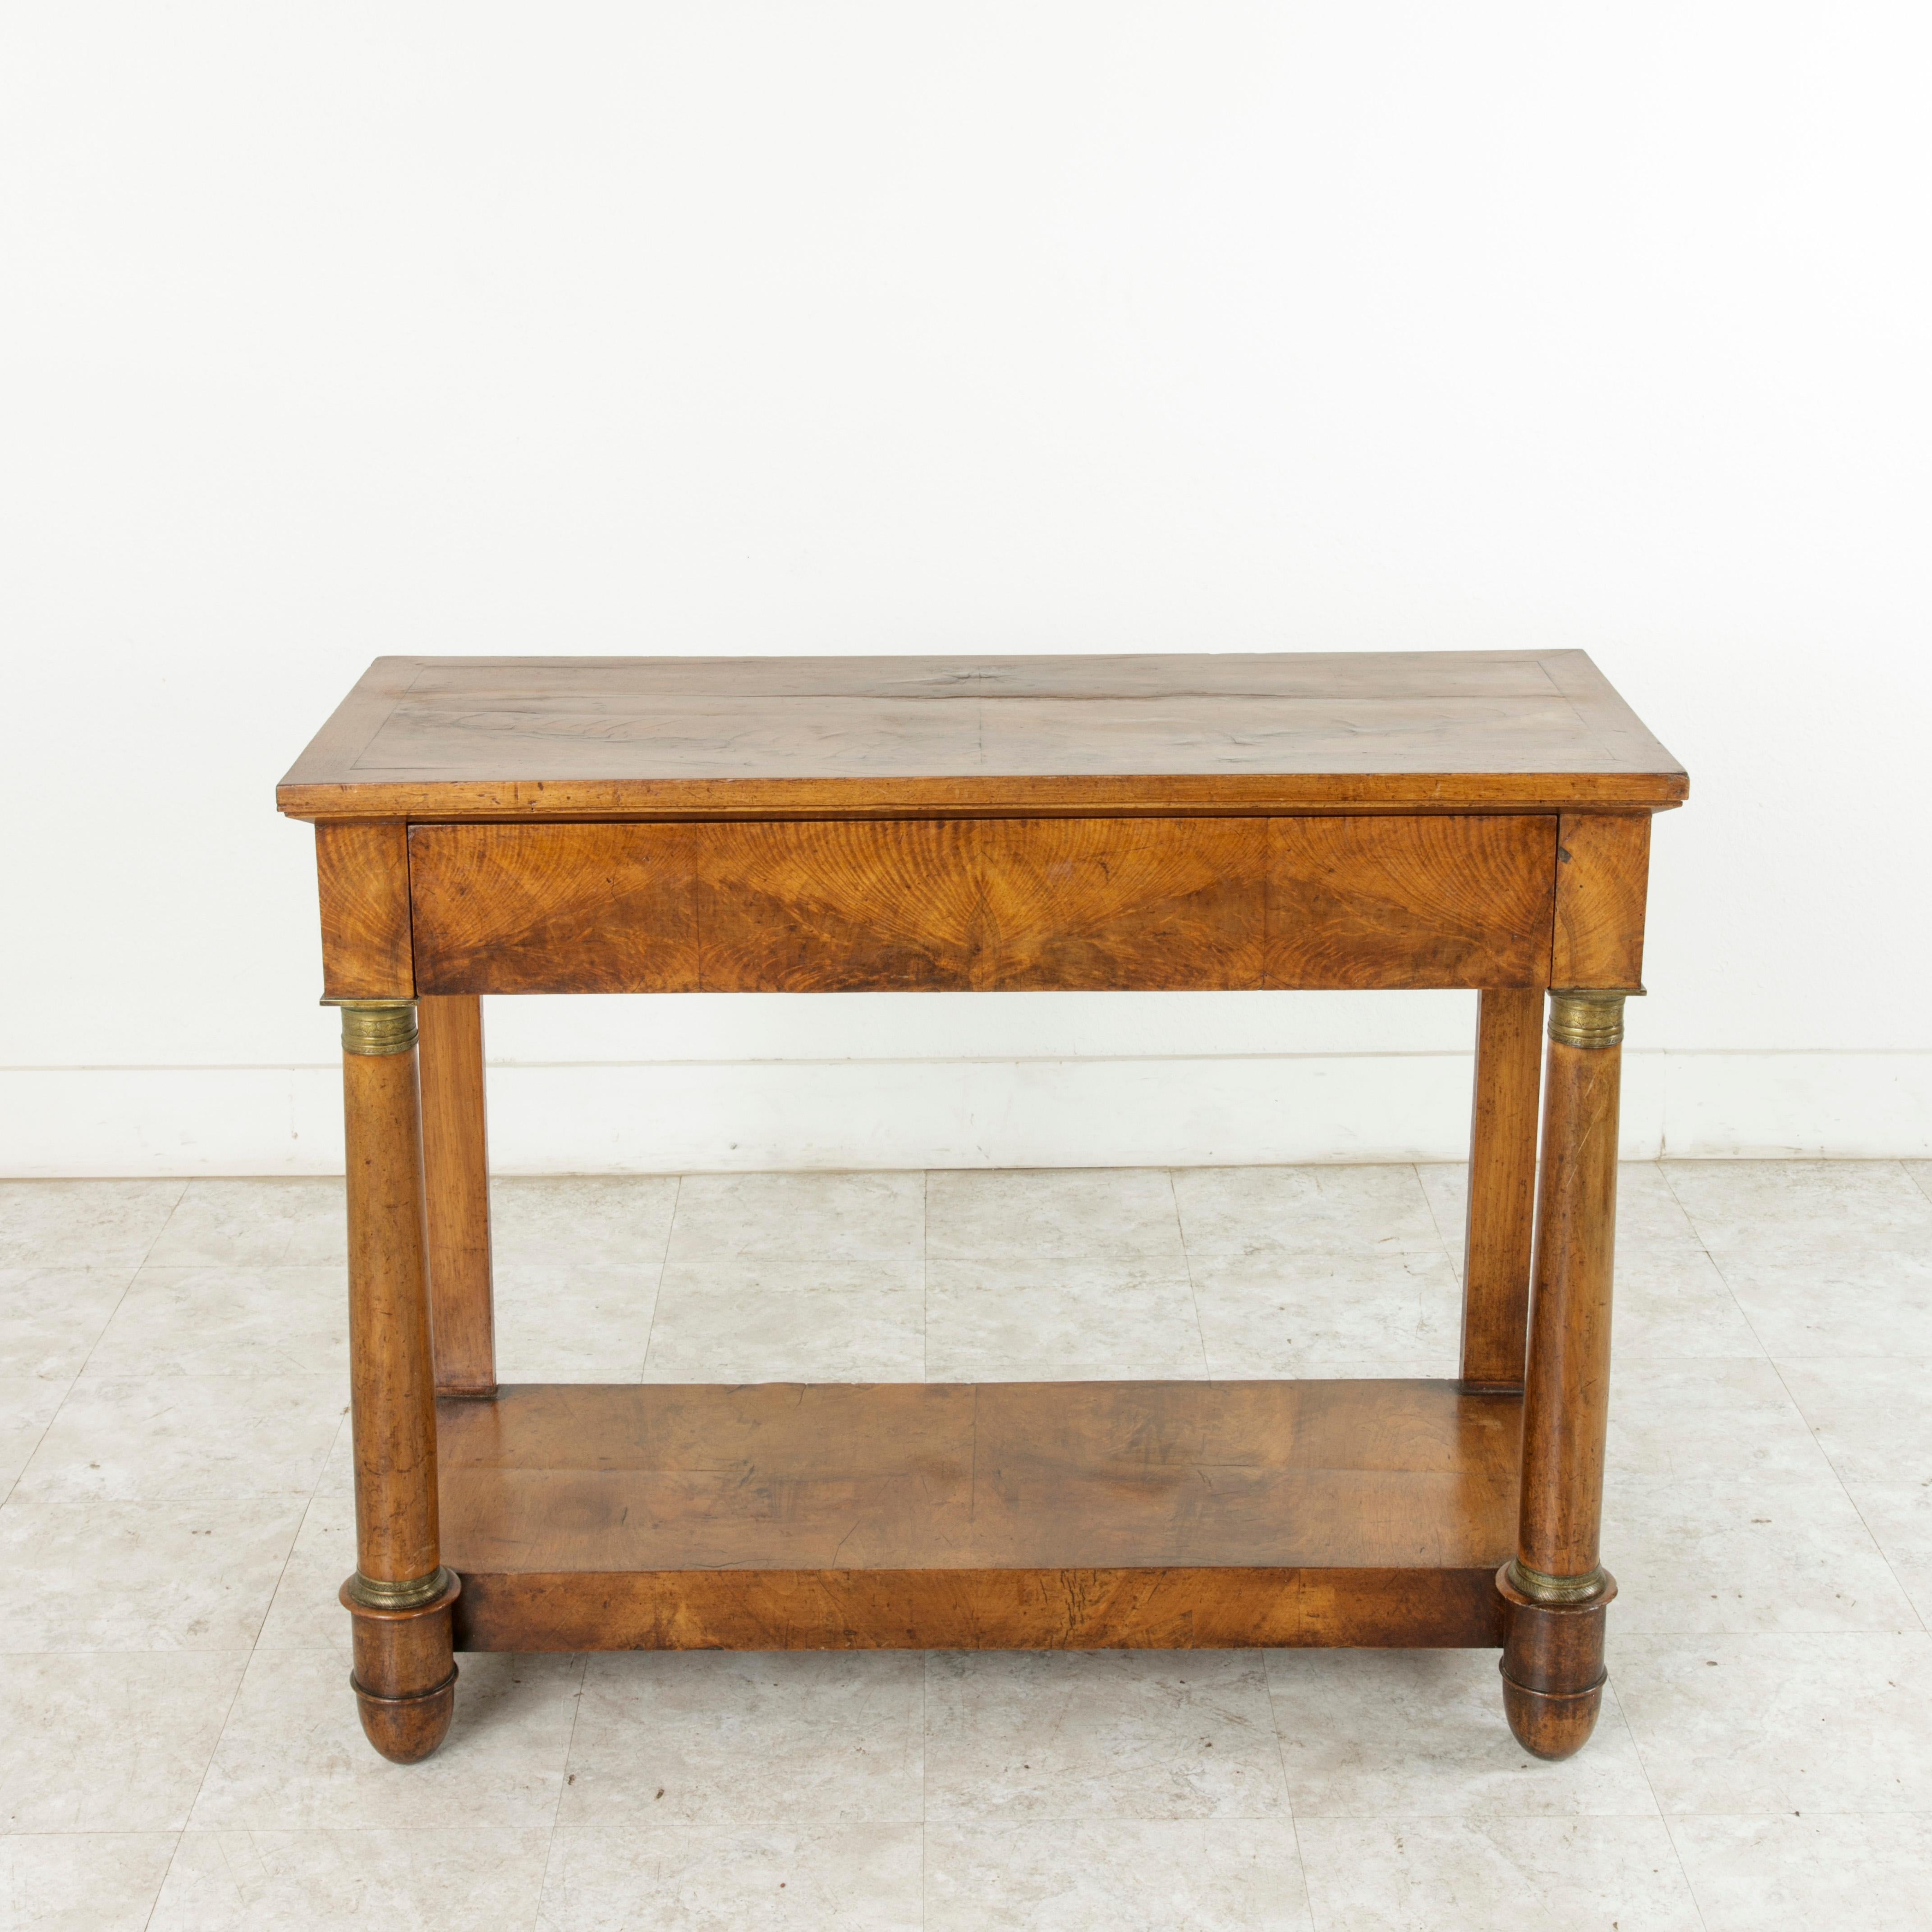 This early 19th century, French Empire period console table features a facade of beautifully book matched burl walnut. Its two columns at the front are detailed with bronze capitals decorated with a papyrus and Greek key motifs. The bronze collars